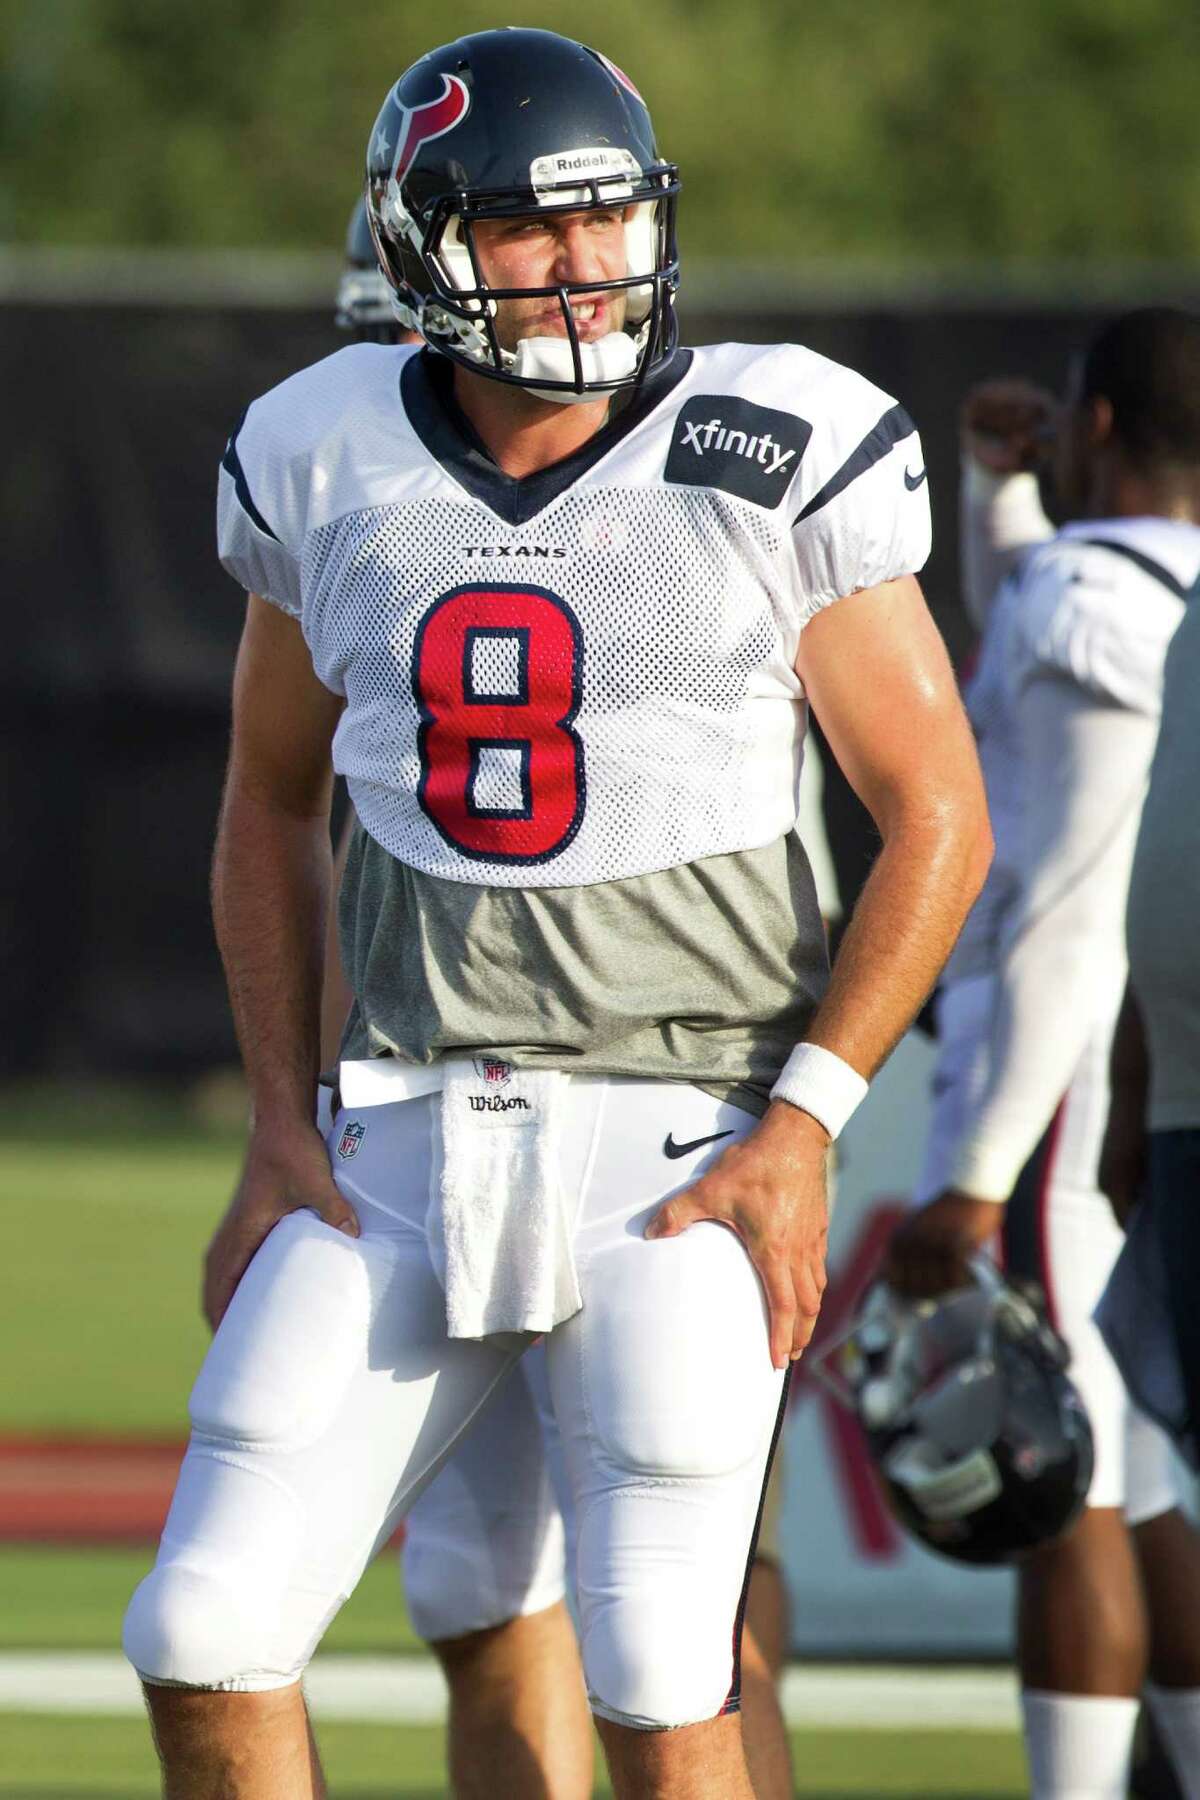 Houston Texans quarterback Matt Schaub gestures to his thigh pads at the beginning of practice during Texans training camp at the Methodist Training Center Monday, July 29, 2013, in Houston. NFL players are now required to wear thigh pads. ( Brett Coomer / Houston Chronicle )